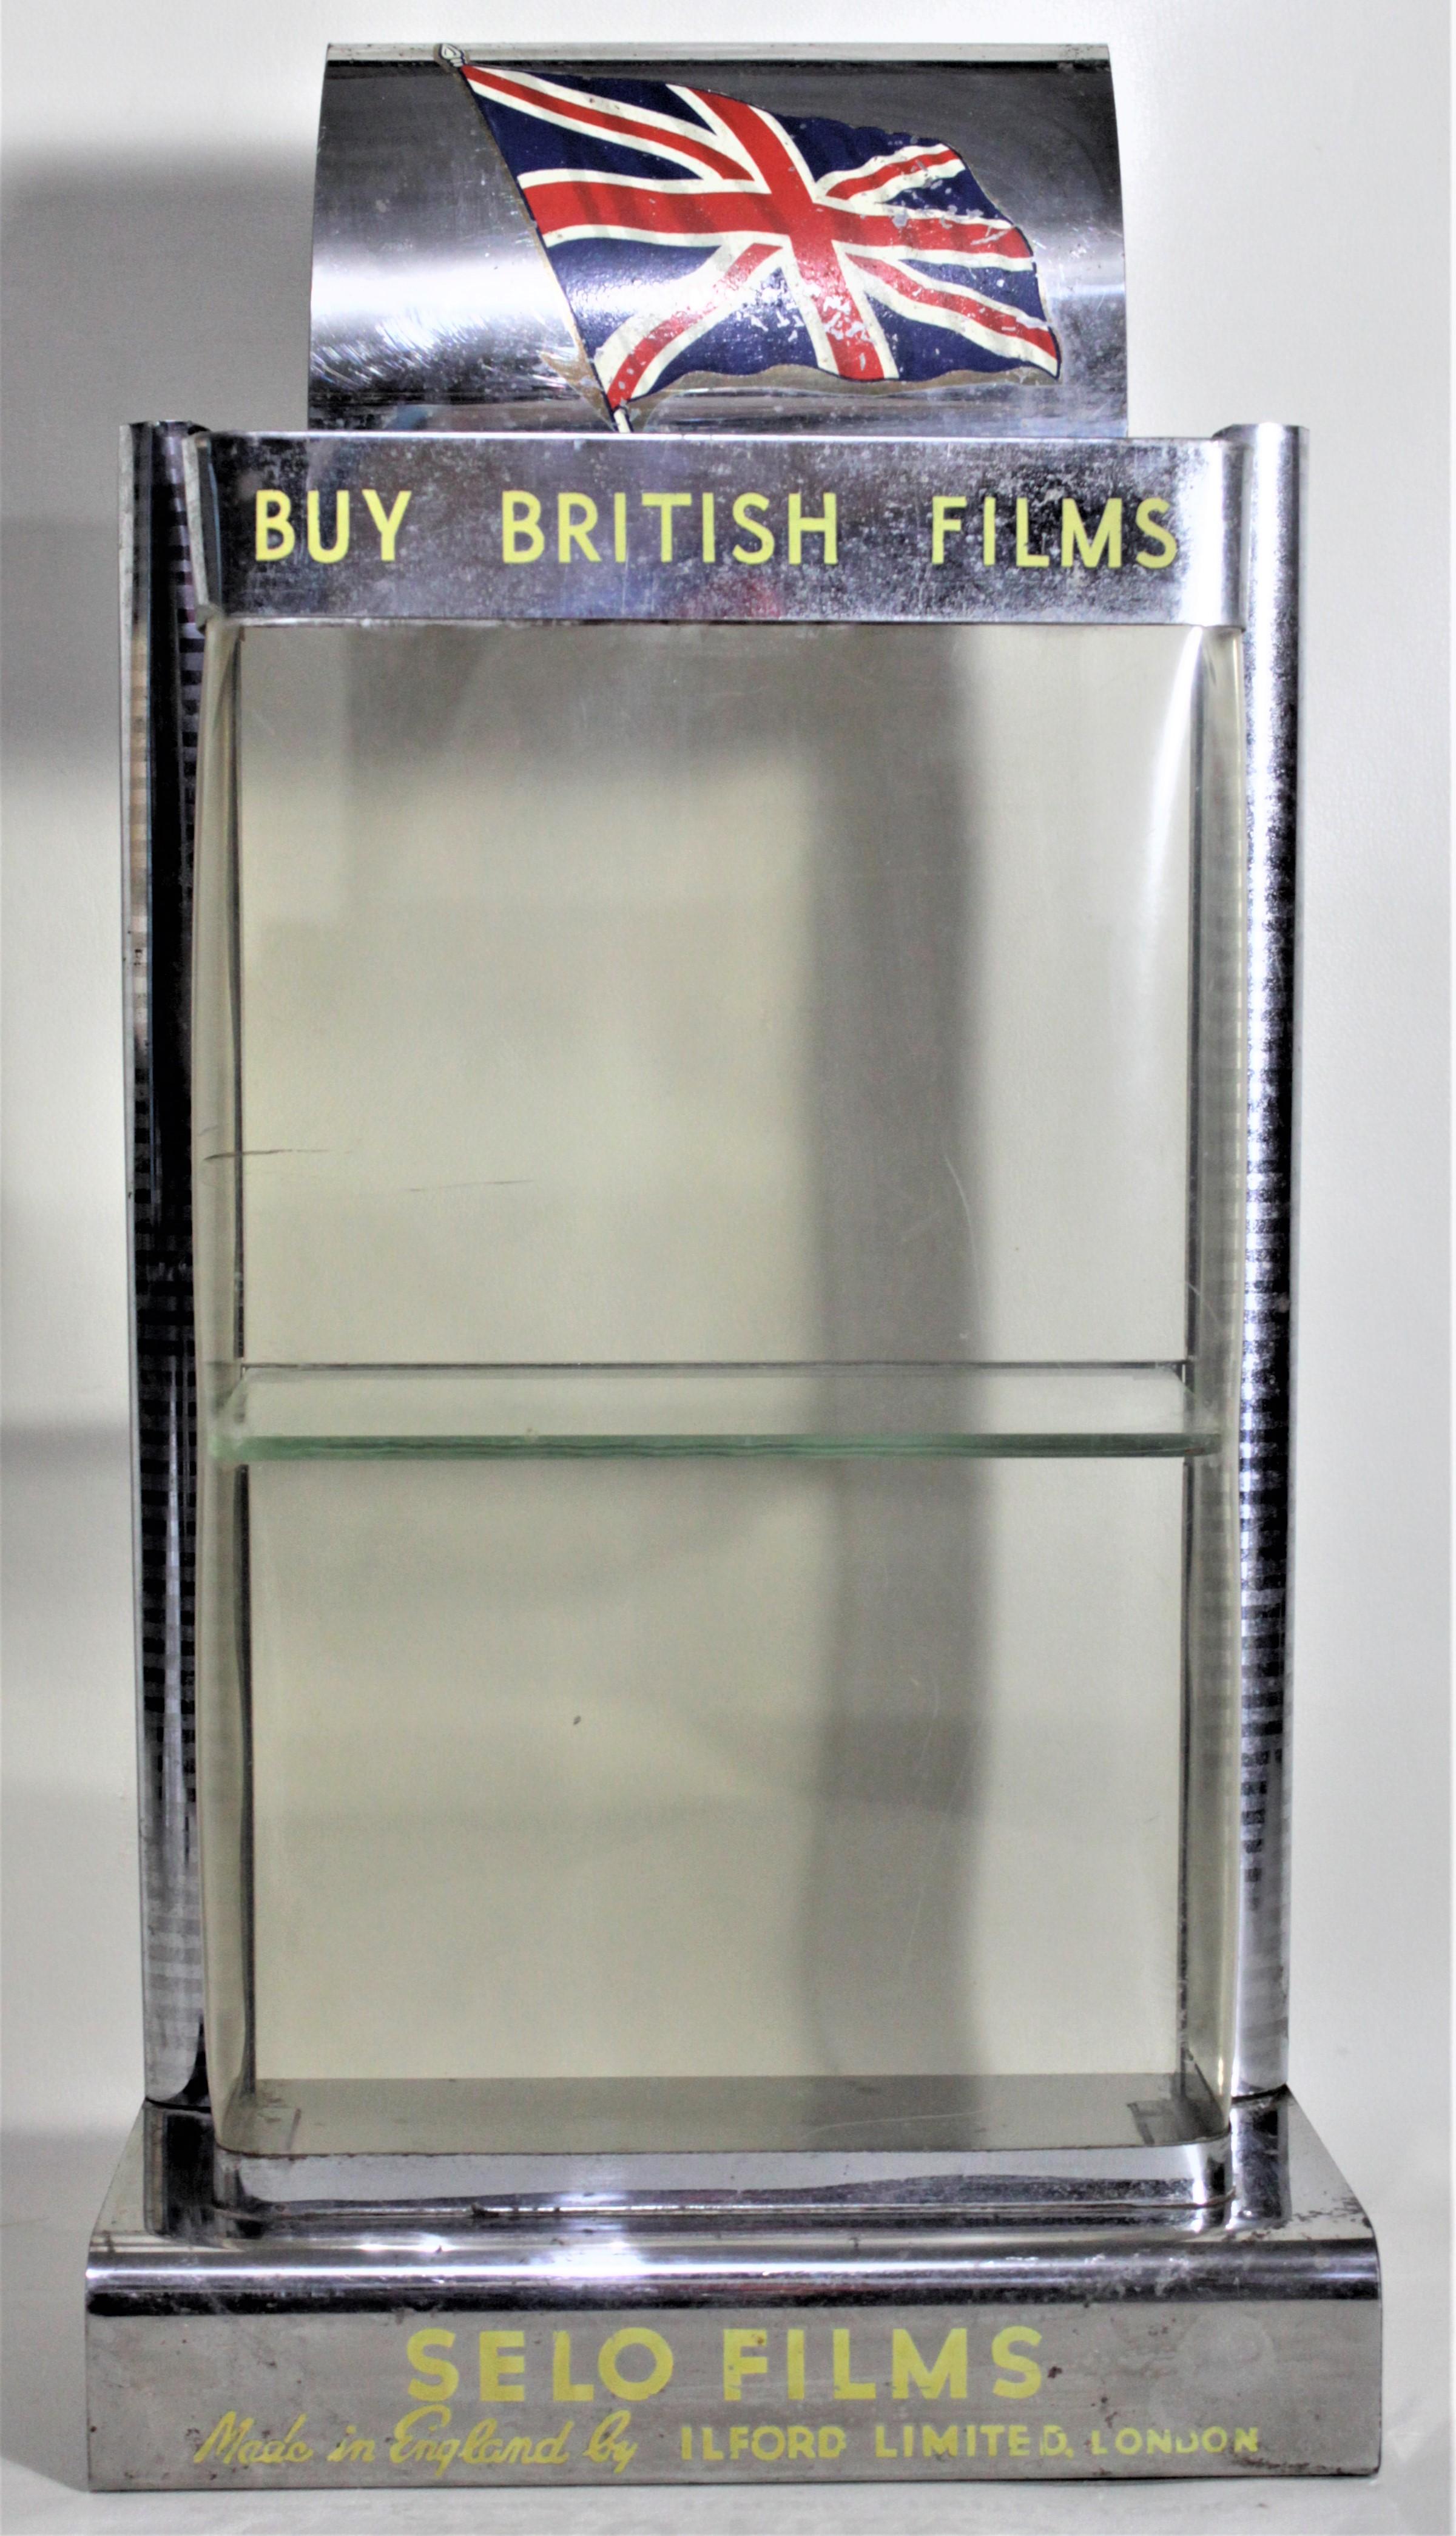 This store display was made for the English film manufacturer, Ilford to advertise their Selo film line during the 1960s in the period Mid-Century Modern style. The frame of the display is done in chromed metal with a molded plastic window. The top